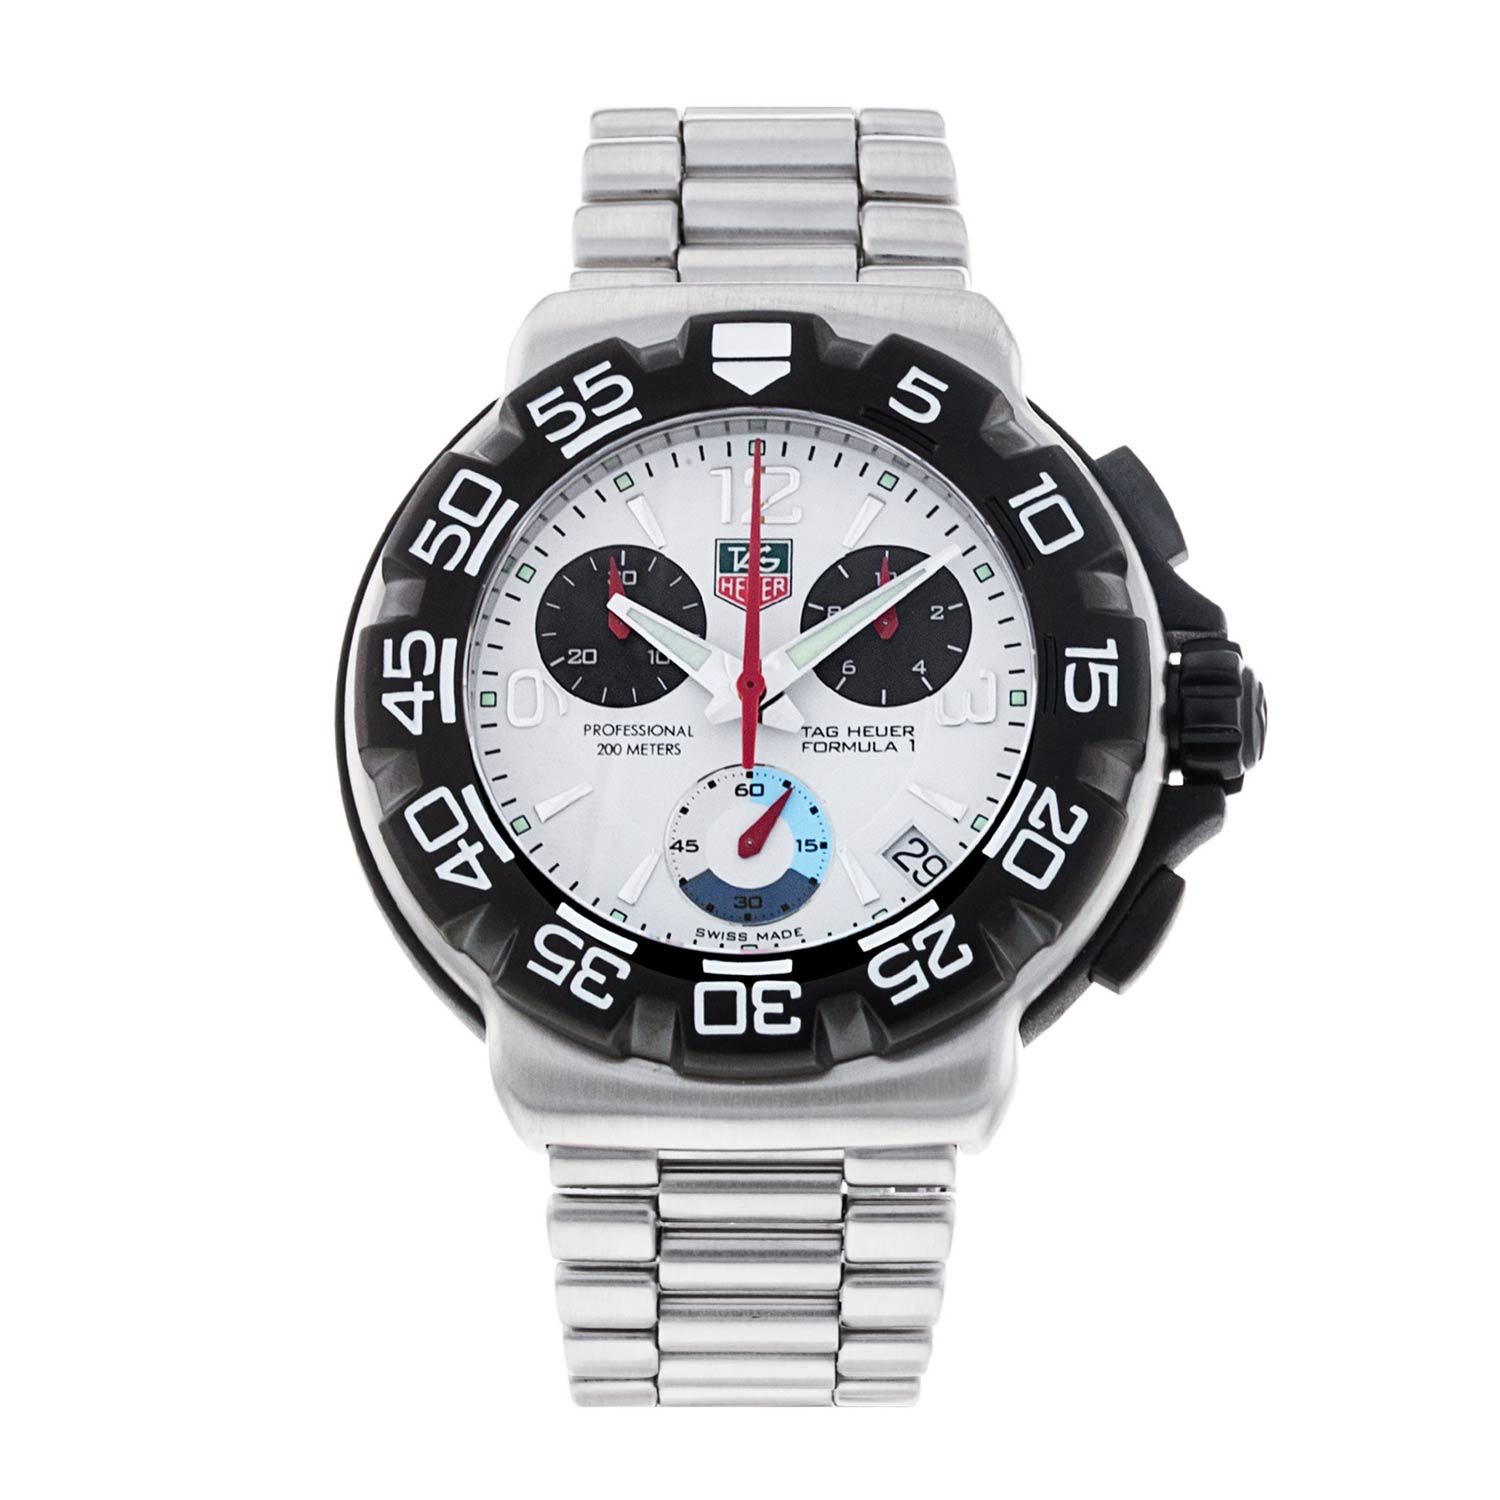 Available in the Shop: Our Selection of Top TAG Heuer Formul 